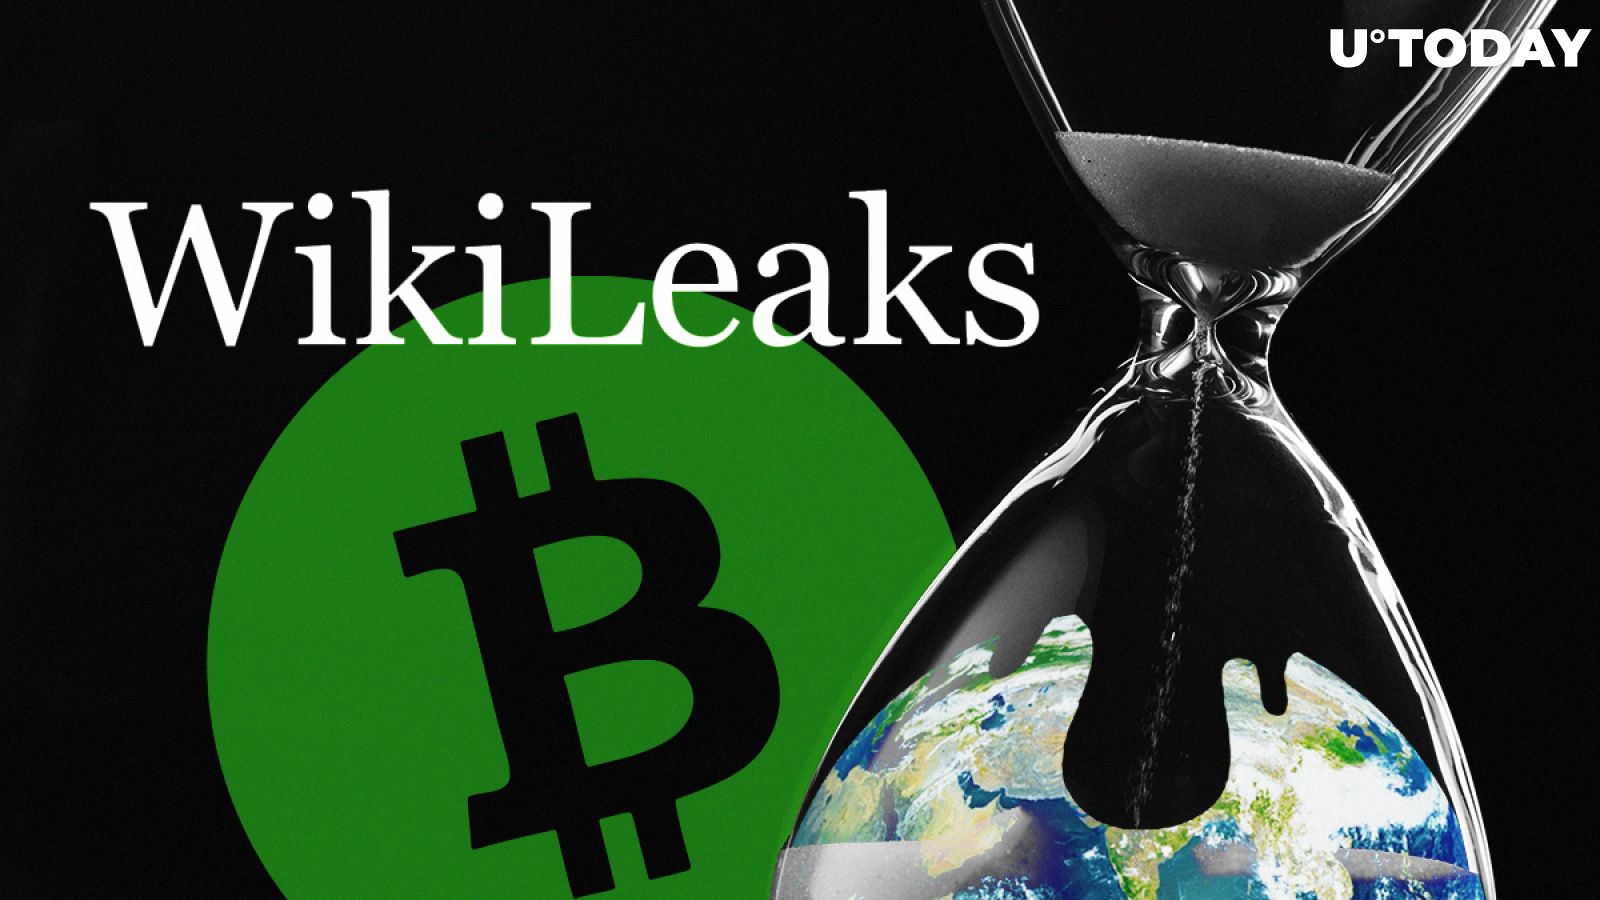 Bitcoin Cash (BCH) Donations Now Accepted by Wikileaks